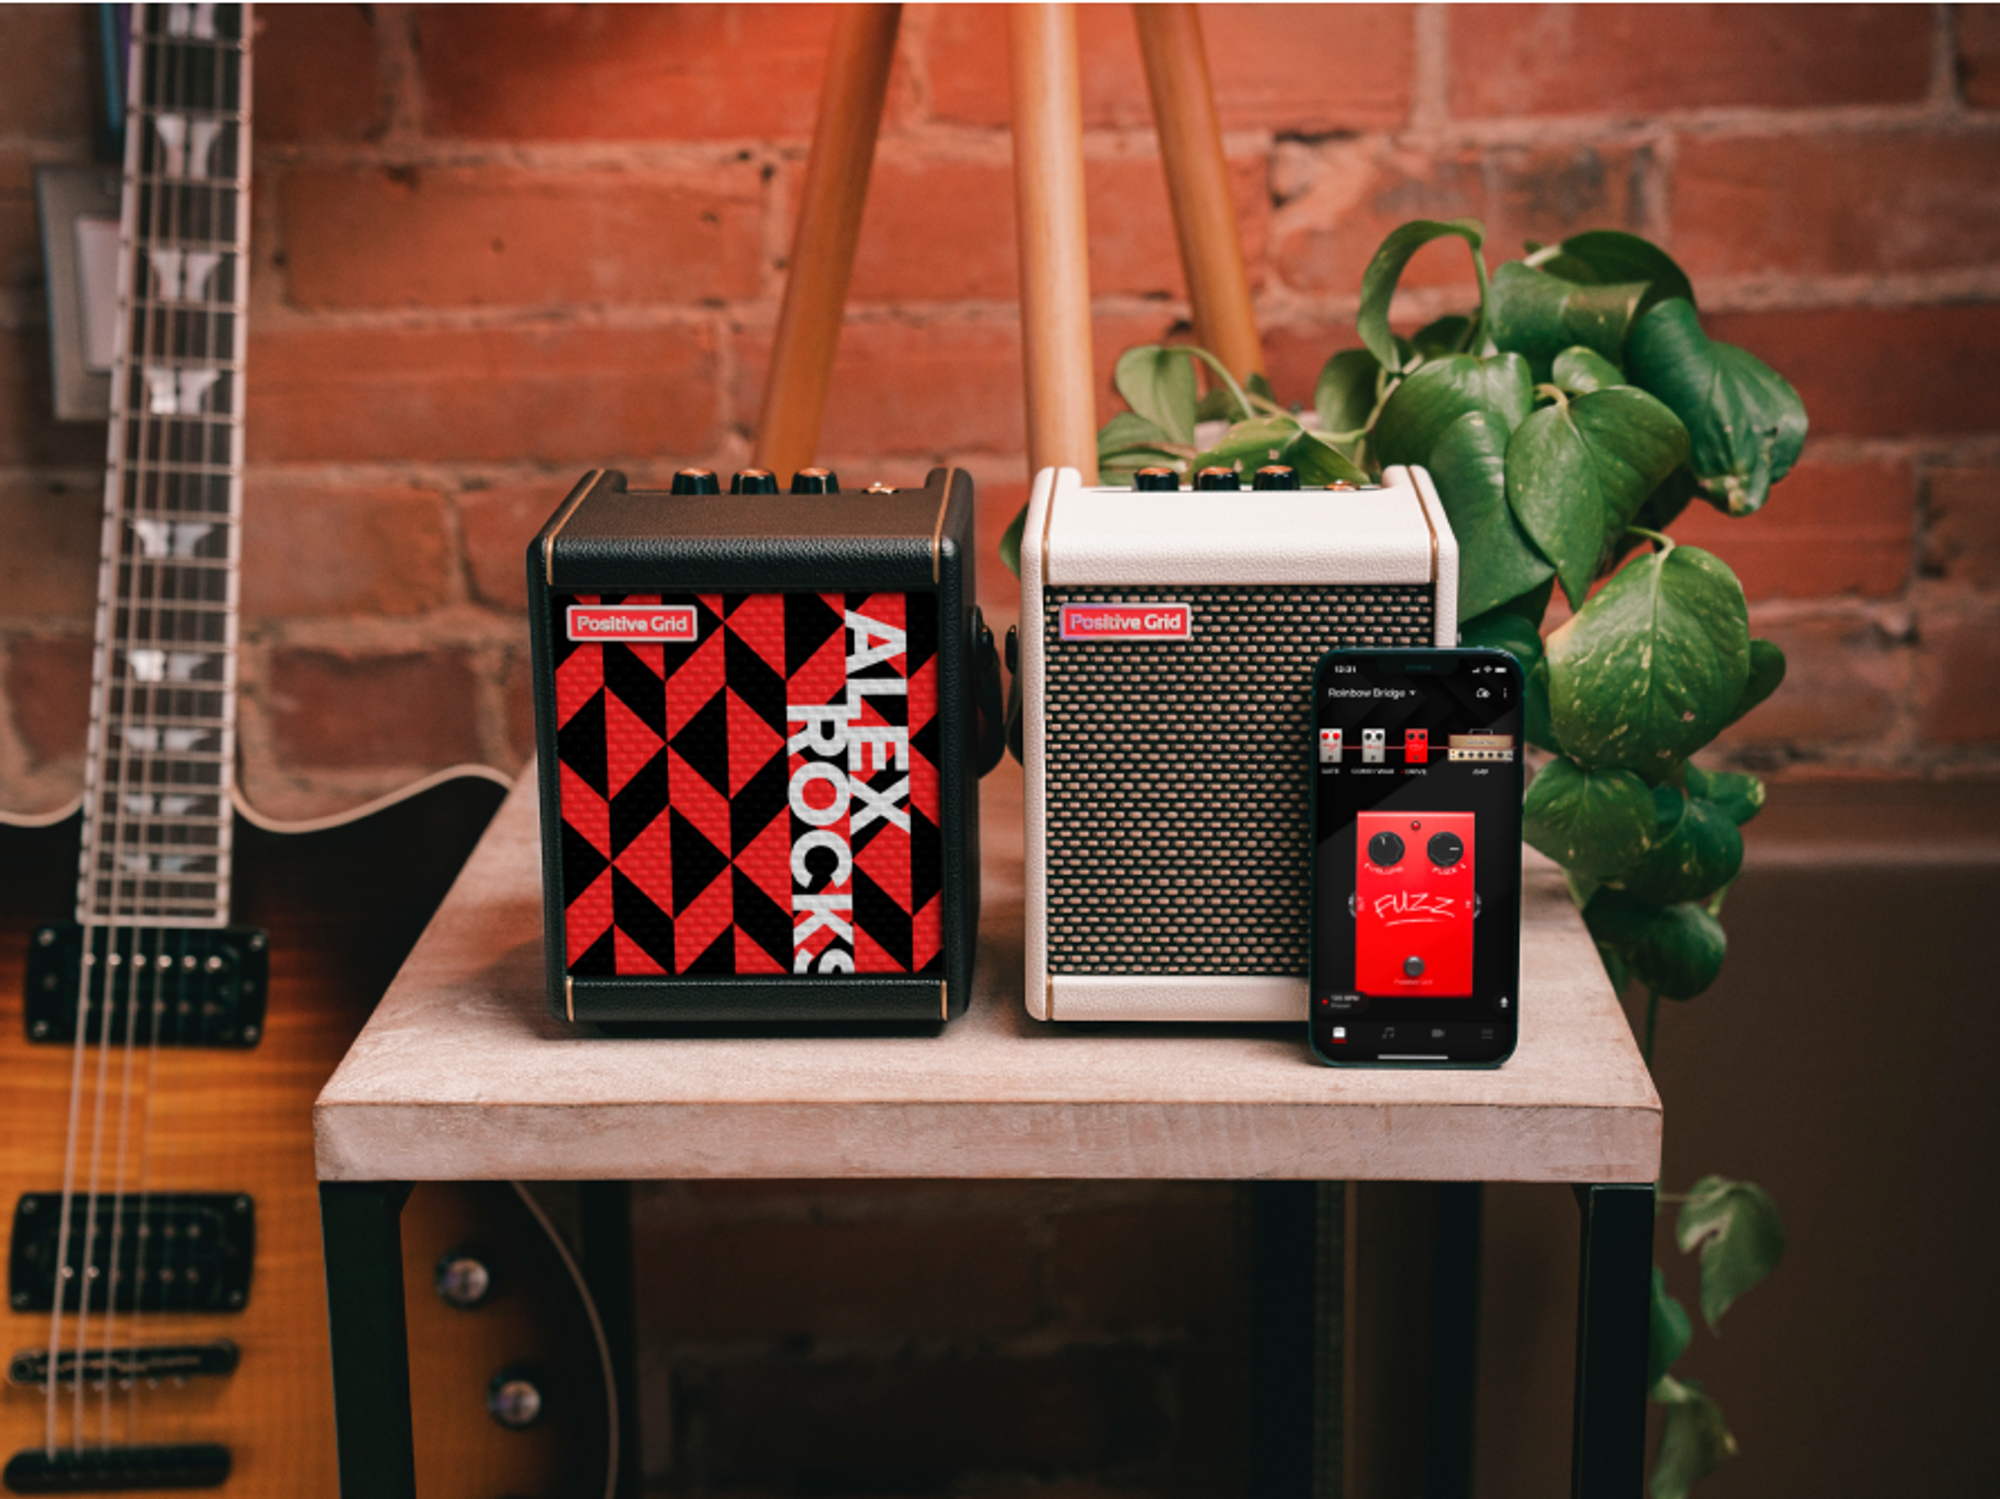 Positive Grid Spark Review: The Perfect Bedroom Guitar Amp